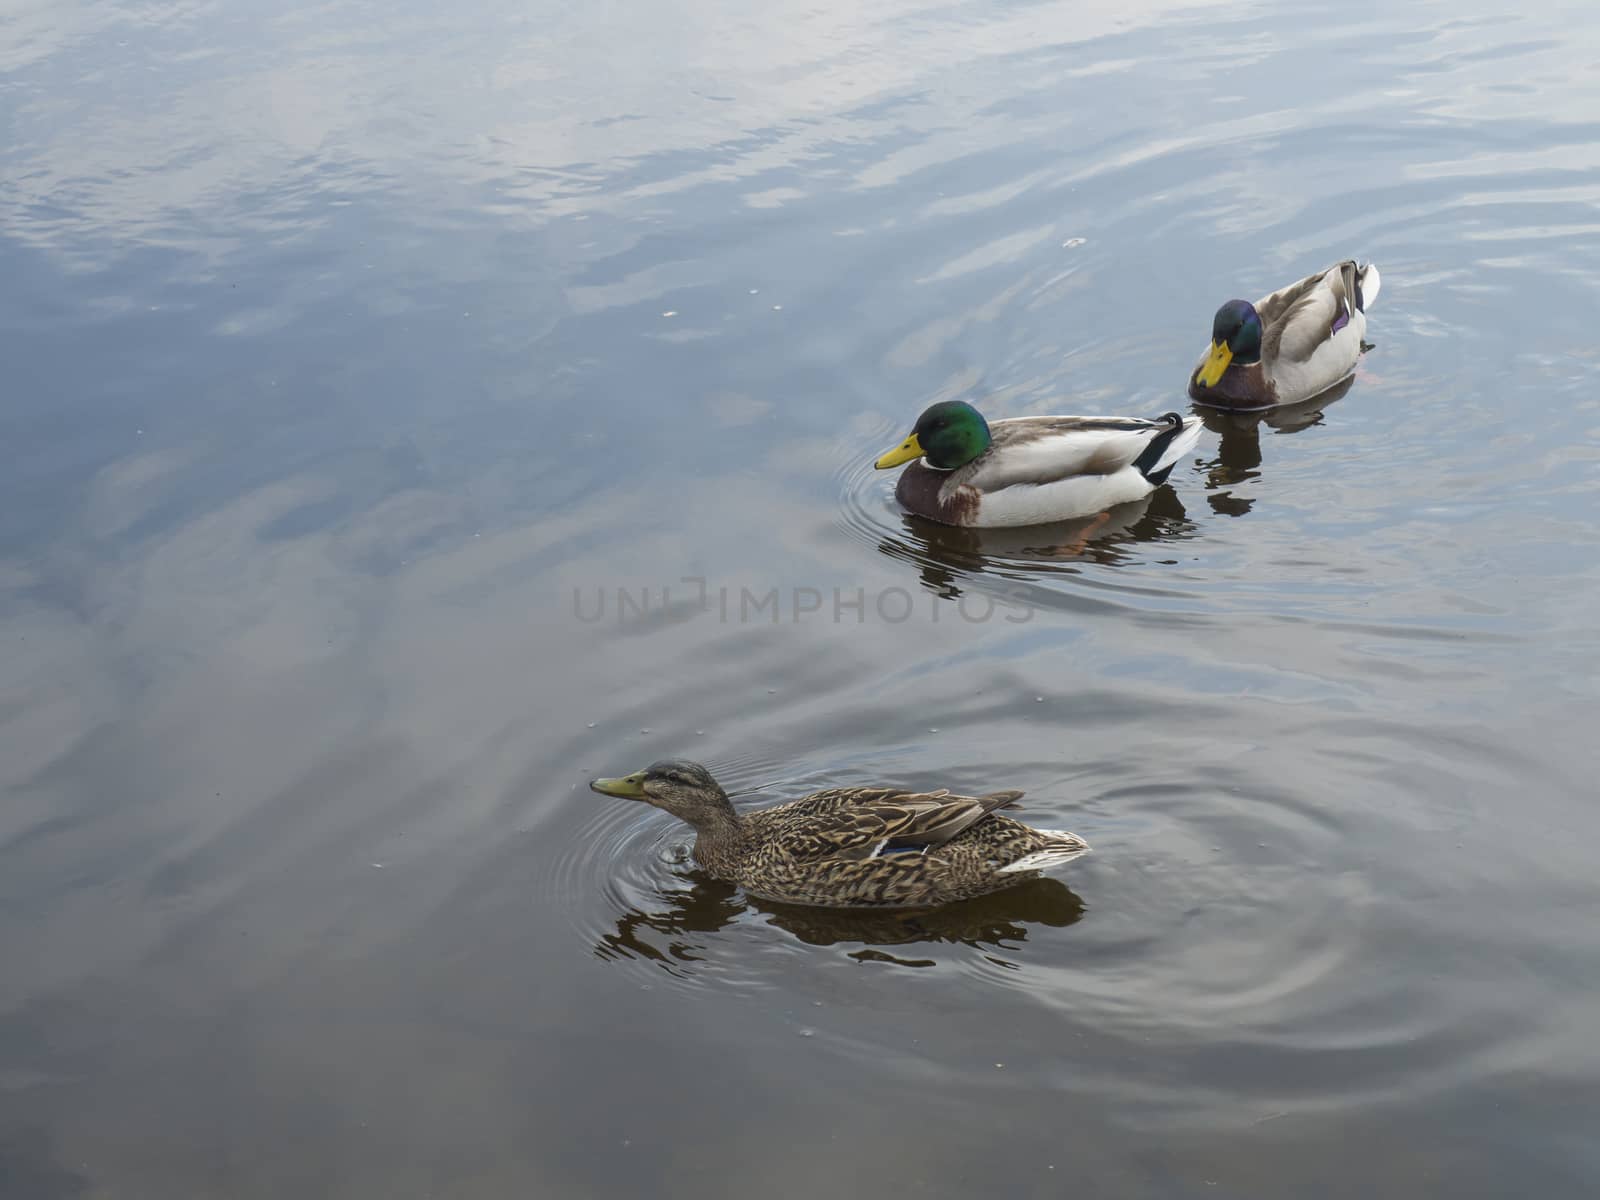 close up swiming widgeon chasing by two duck on water suface by Henkeova